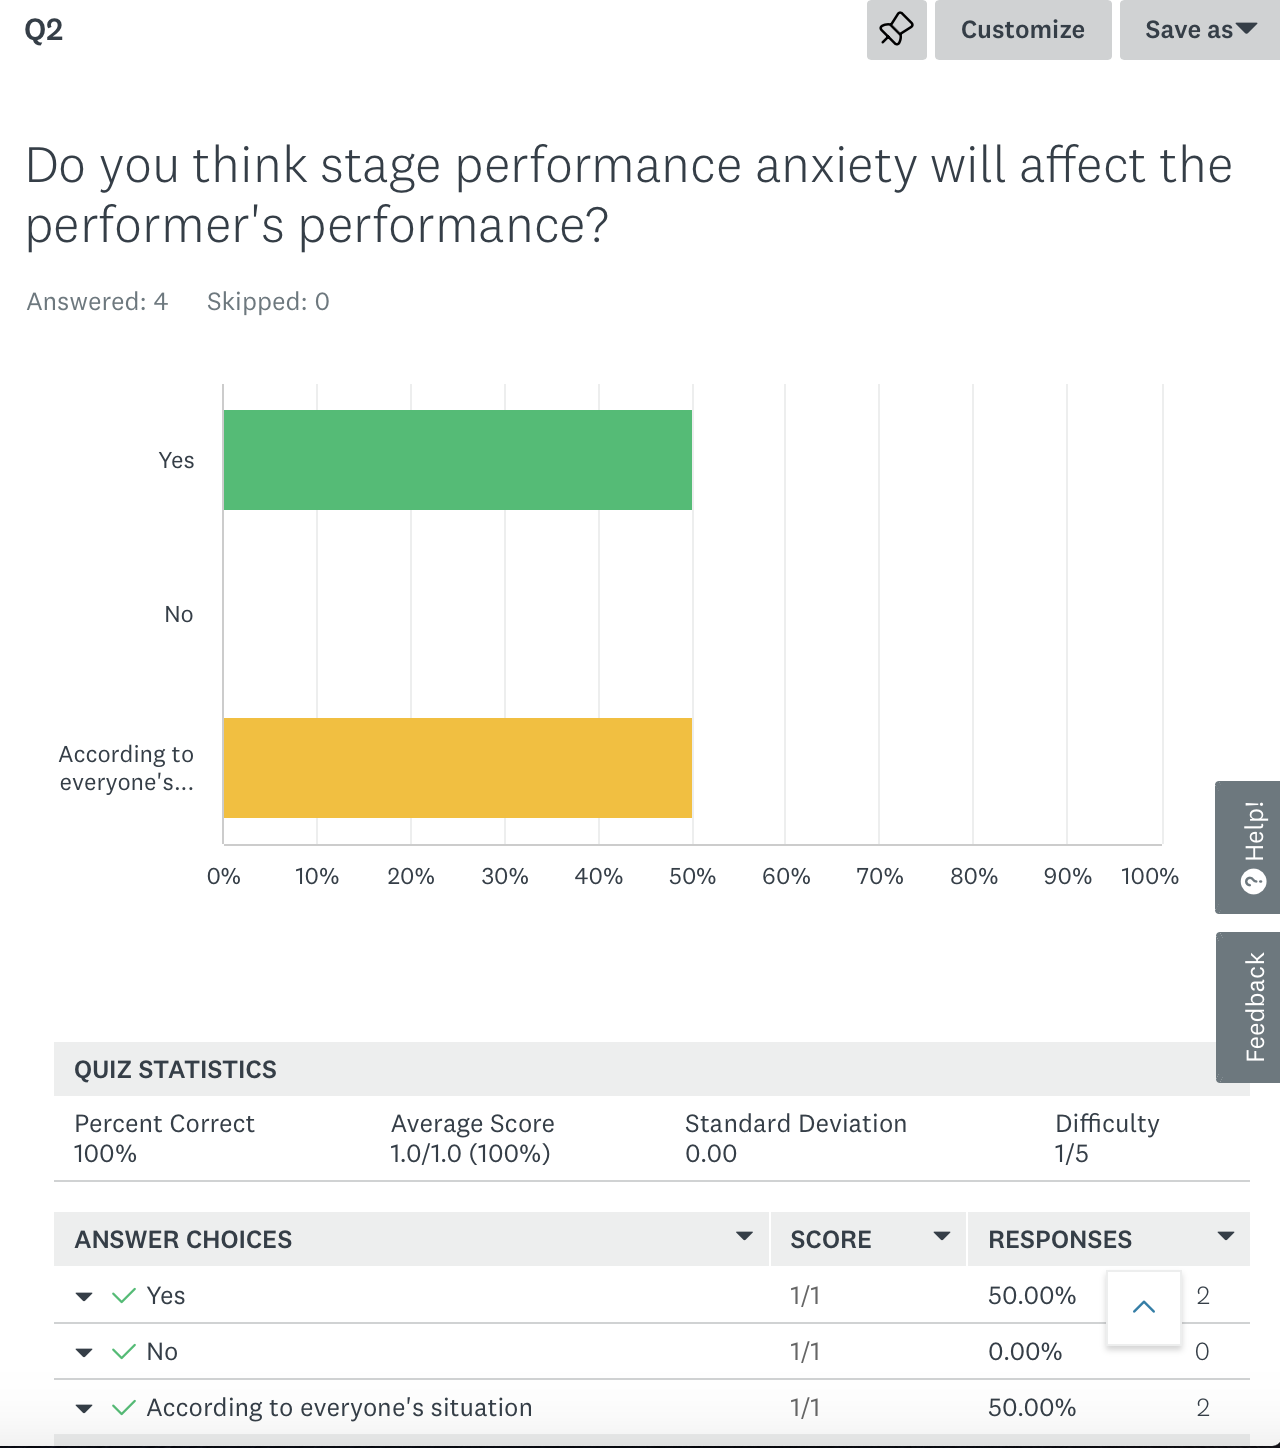 Do you think stage performance anxiety will affect the performer's performance